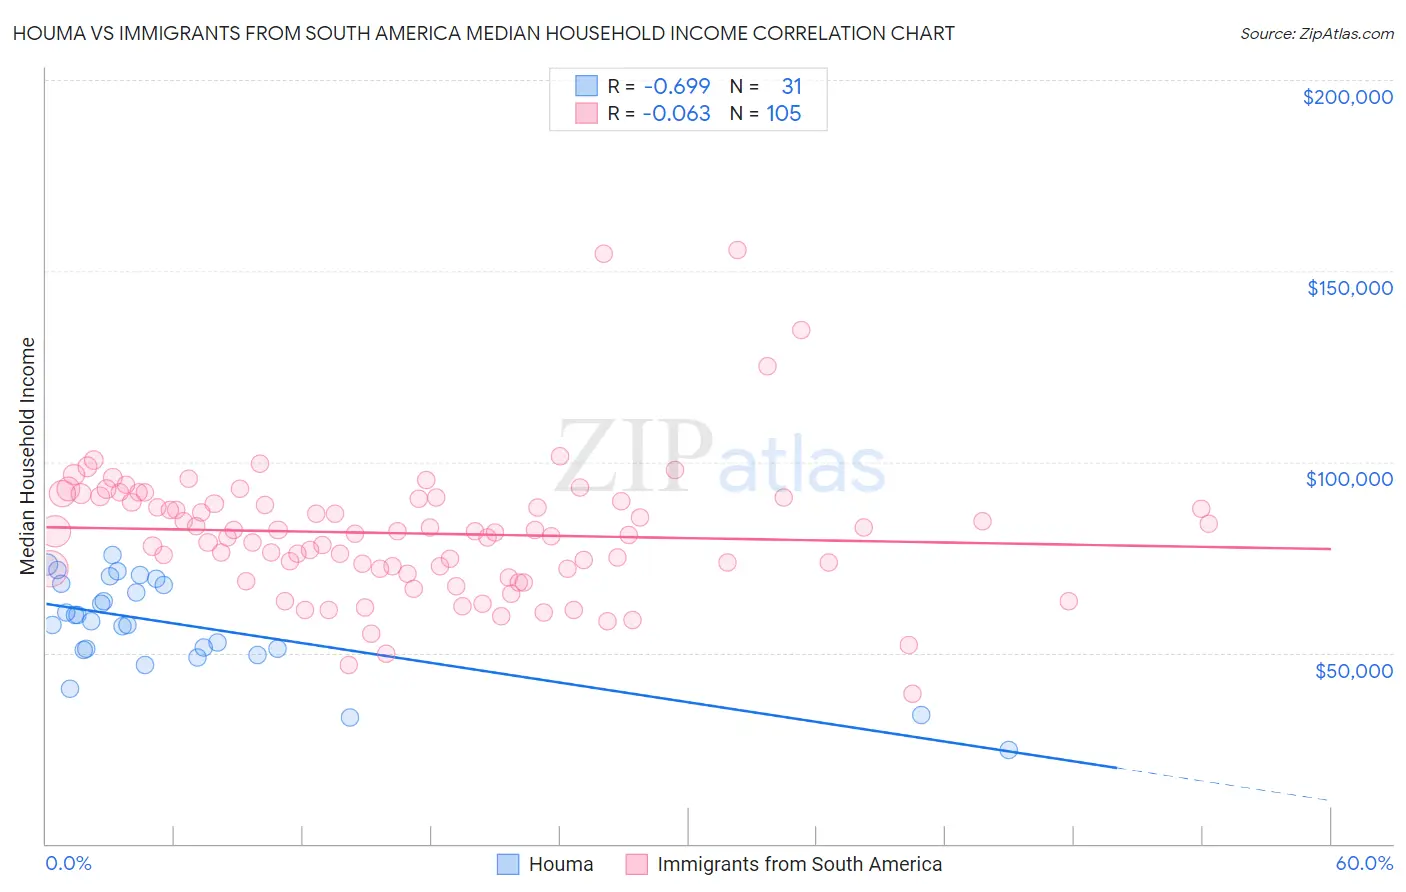 Houma vs Immigrants from South America Median Household Income